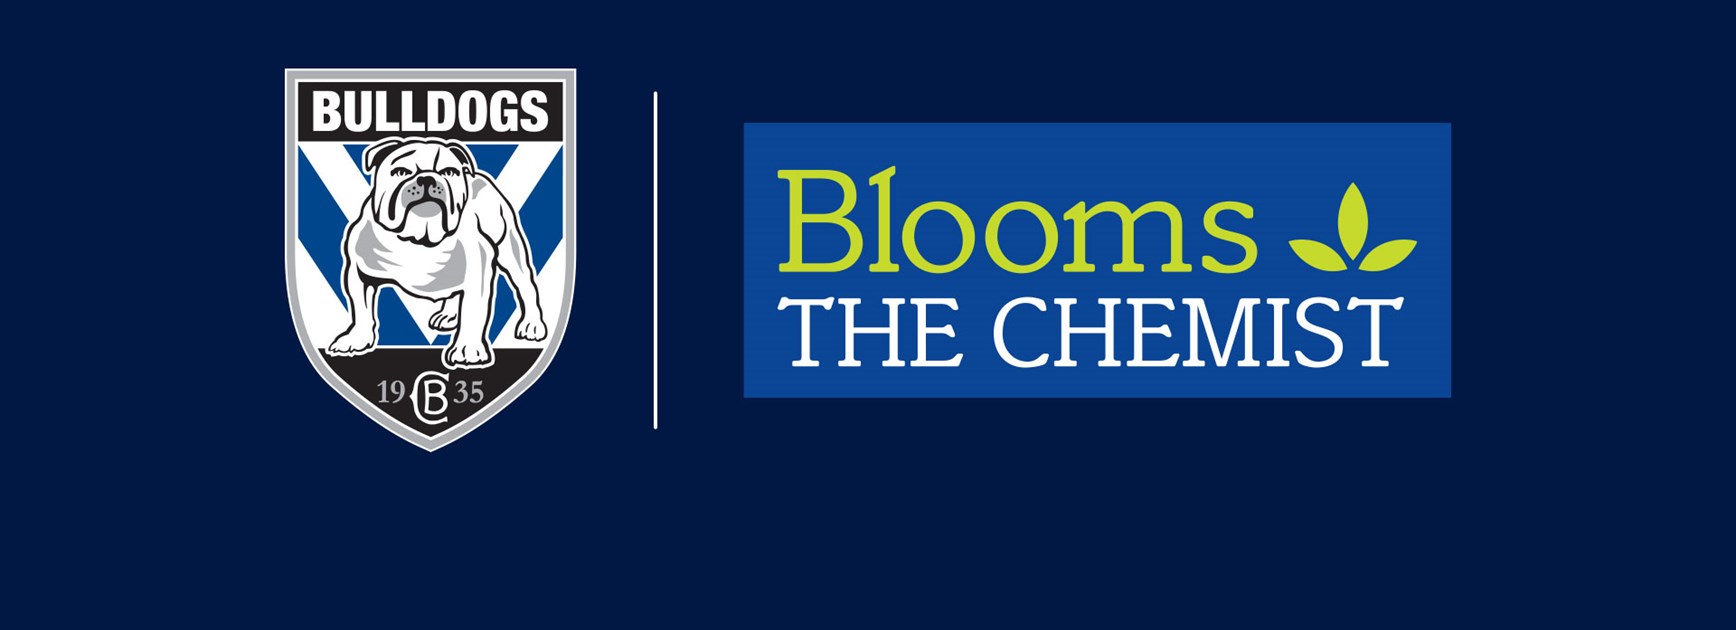 Blooms The Chemist re-sign with the Bulldogs for a further two years